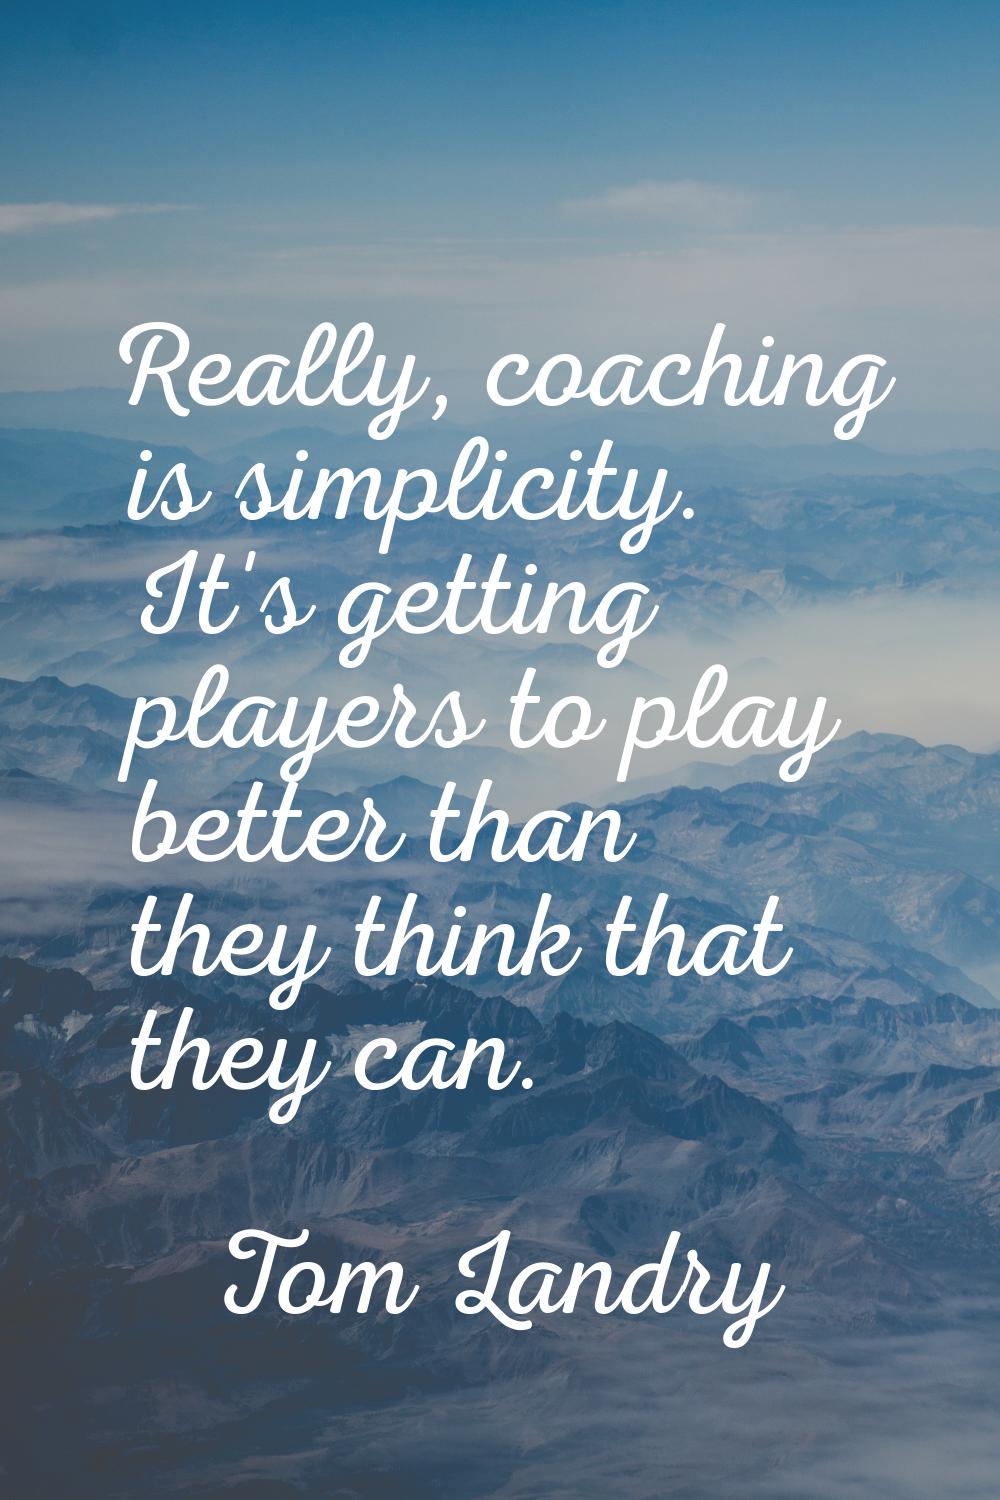 Really, coaching is simplicity. It's getting players to play better than they think that they can.